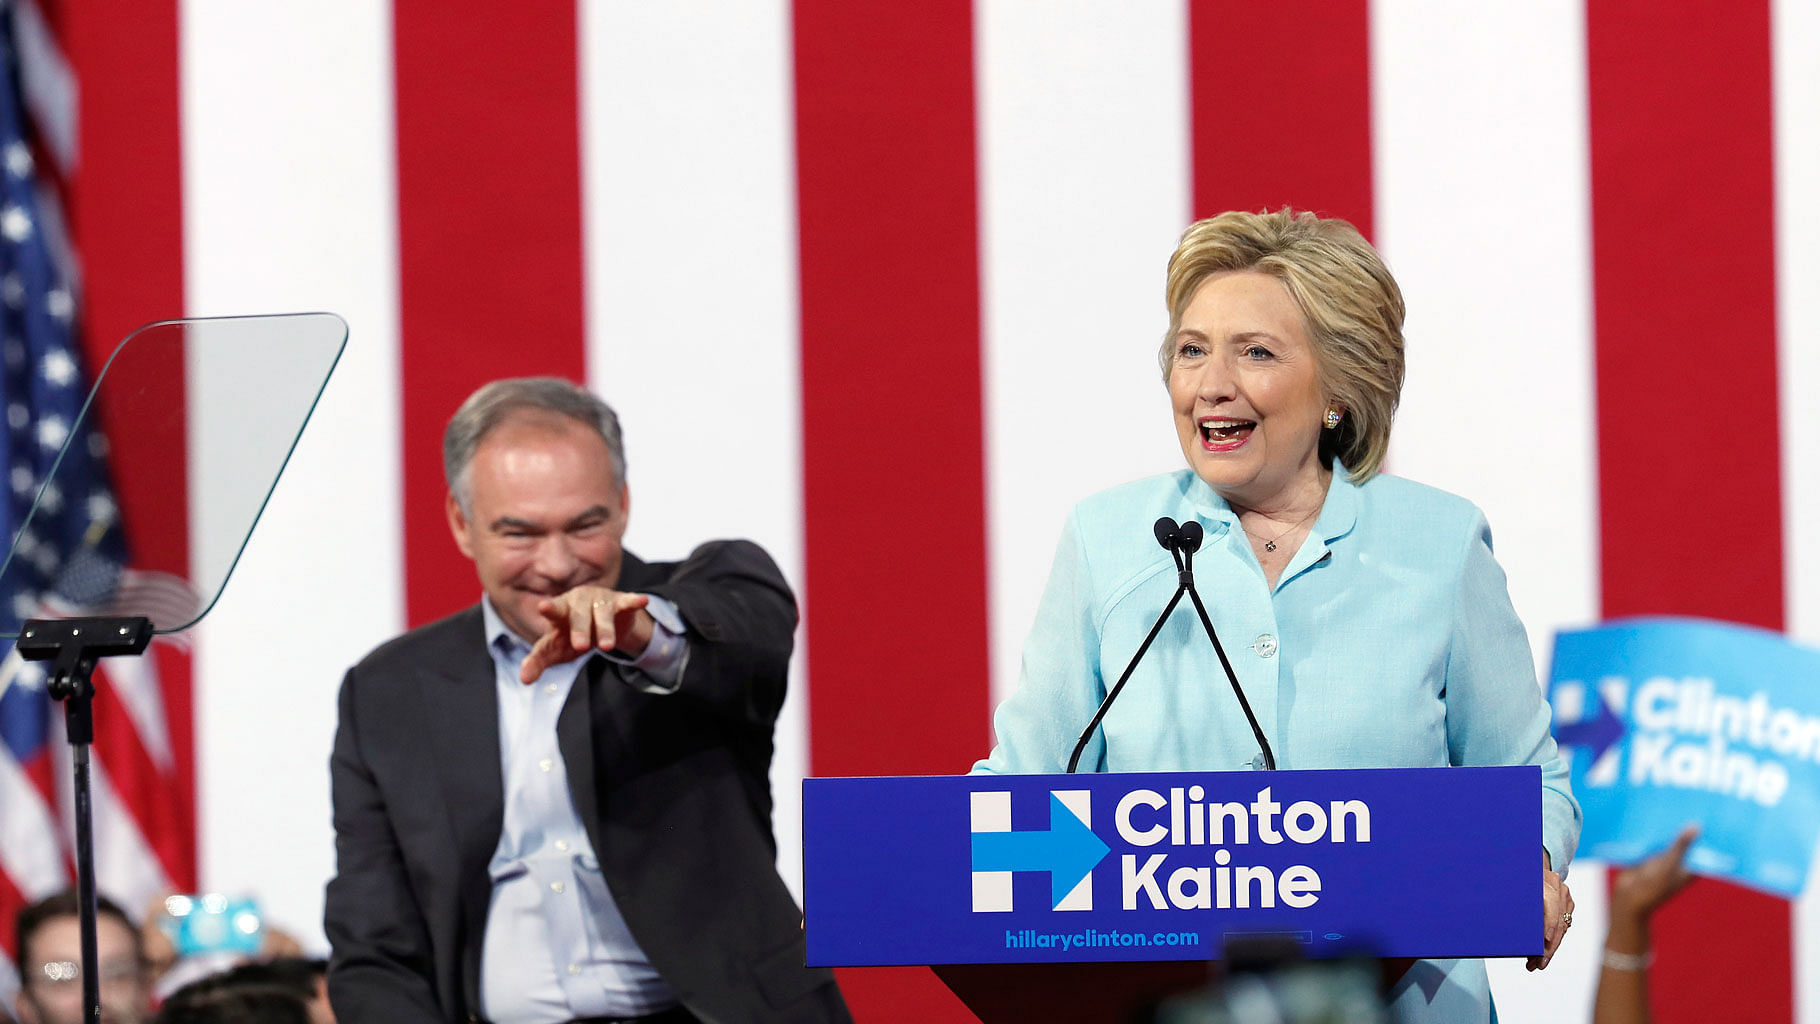 Democratic presidential candidate Hillary Clinton is joined by Senator Tim Kaine, D-Va., as she speaks at a rally at Florida International University. (Photo: AP)